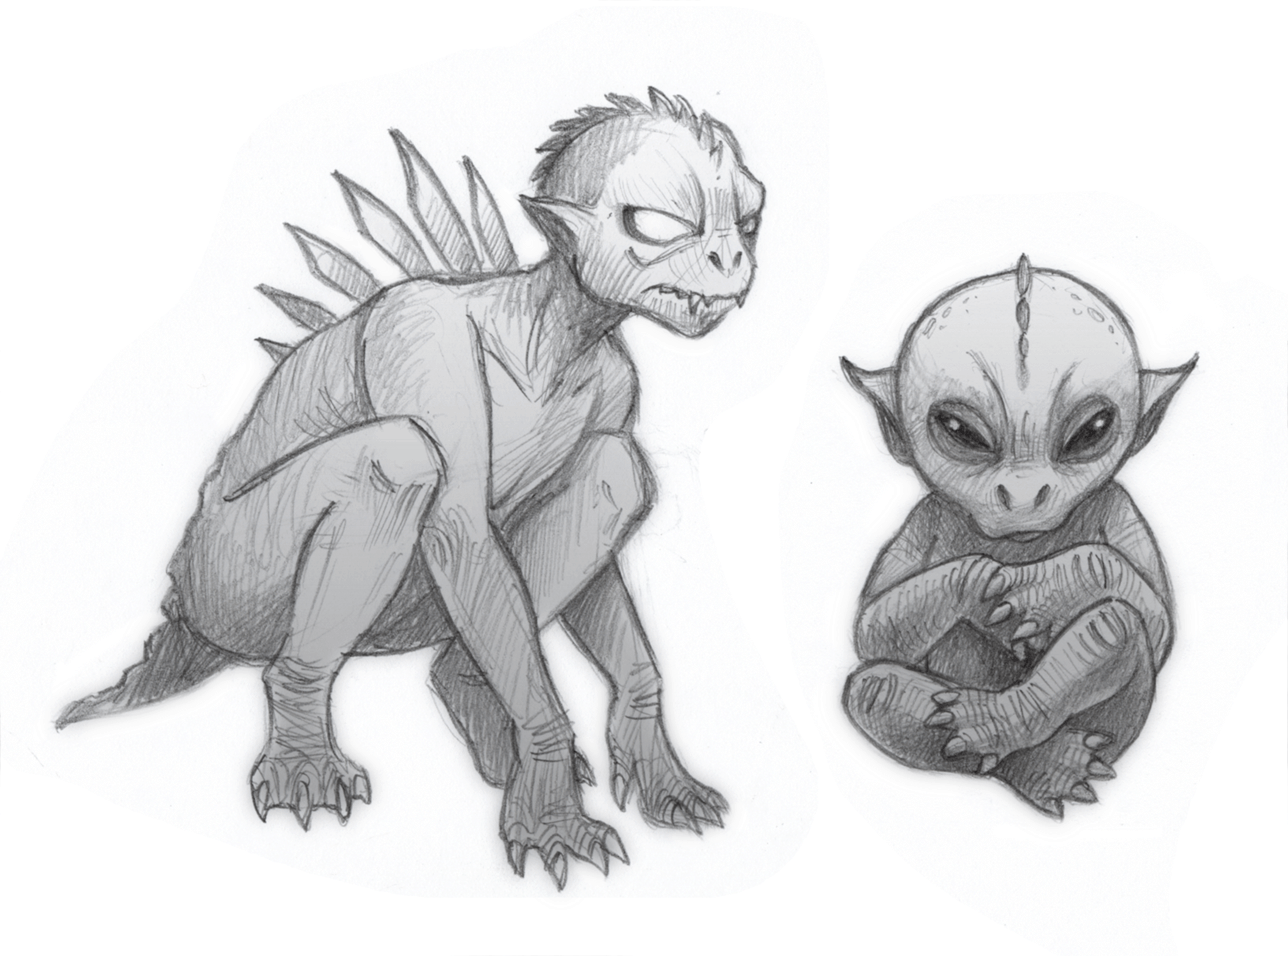 Drawings of a big and little Chupacabra, a cryptid whose name means "goat sucker" in Spanish; first reported in 1995 in Puerto Rico, U.S. // Art by Rick Spears from Cryptid Creatures: A Field Guide